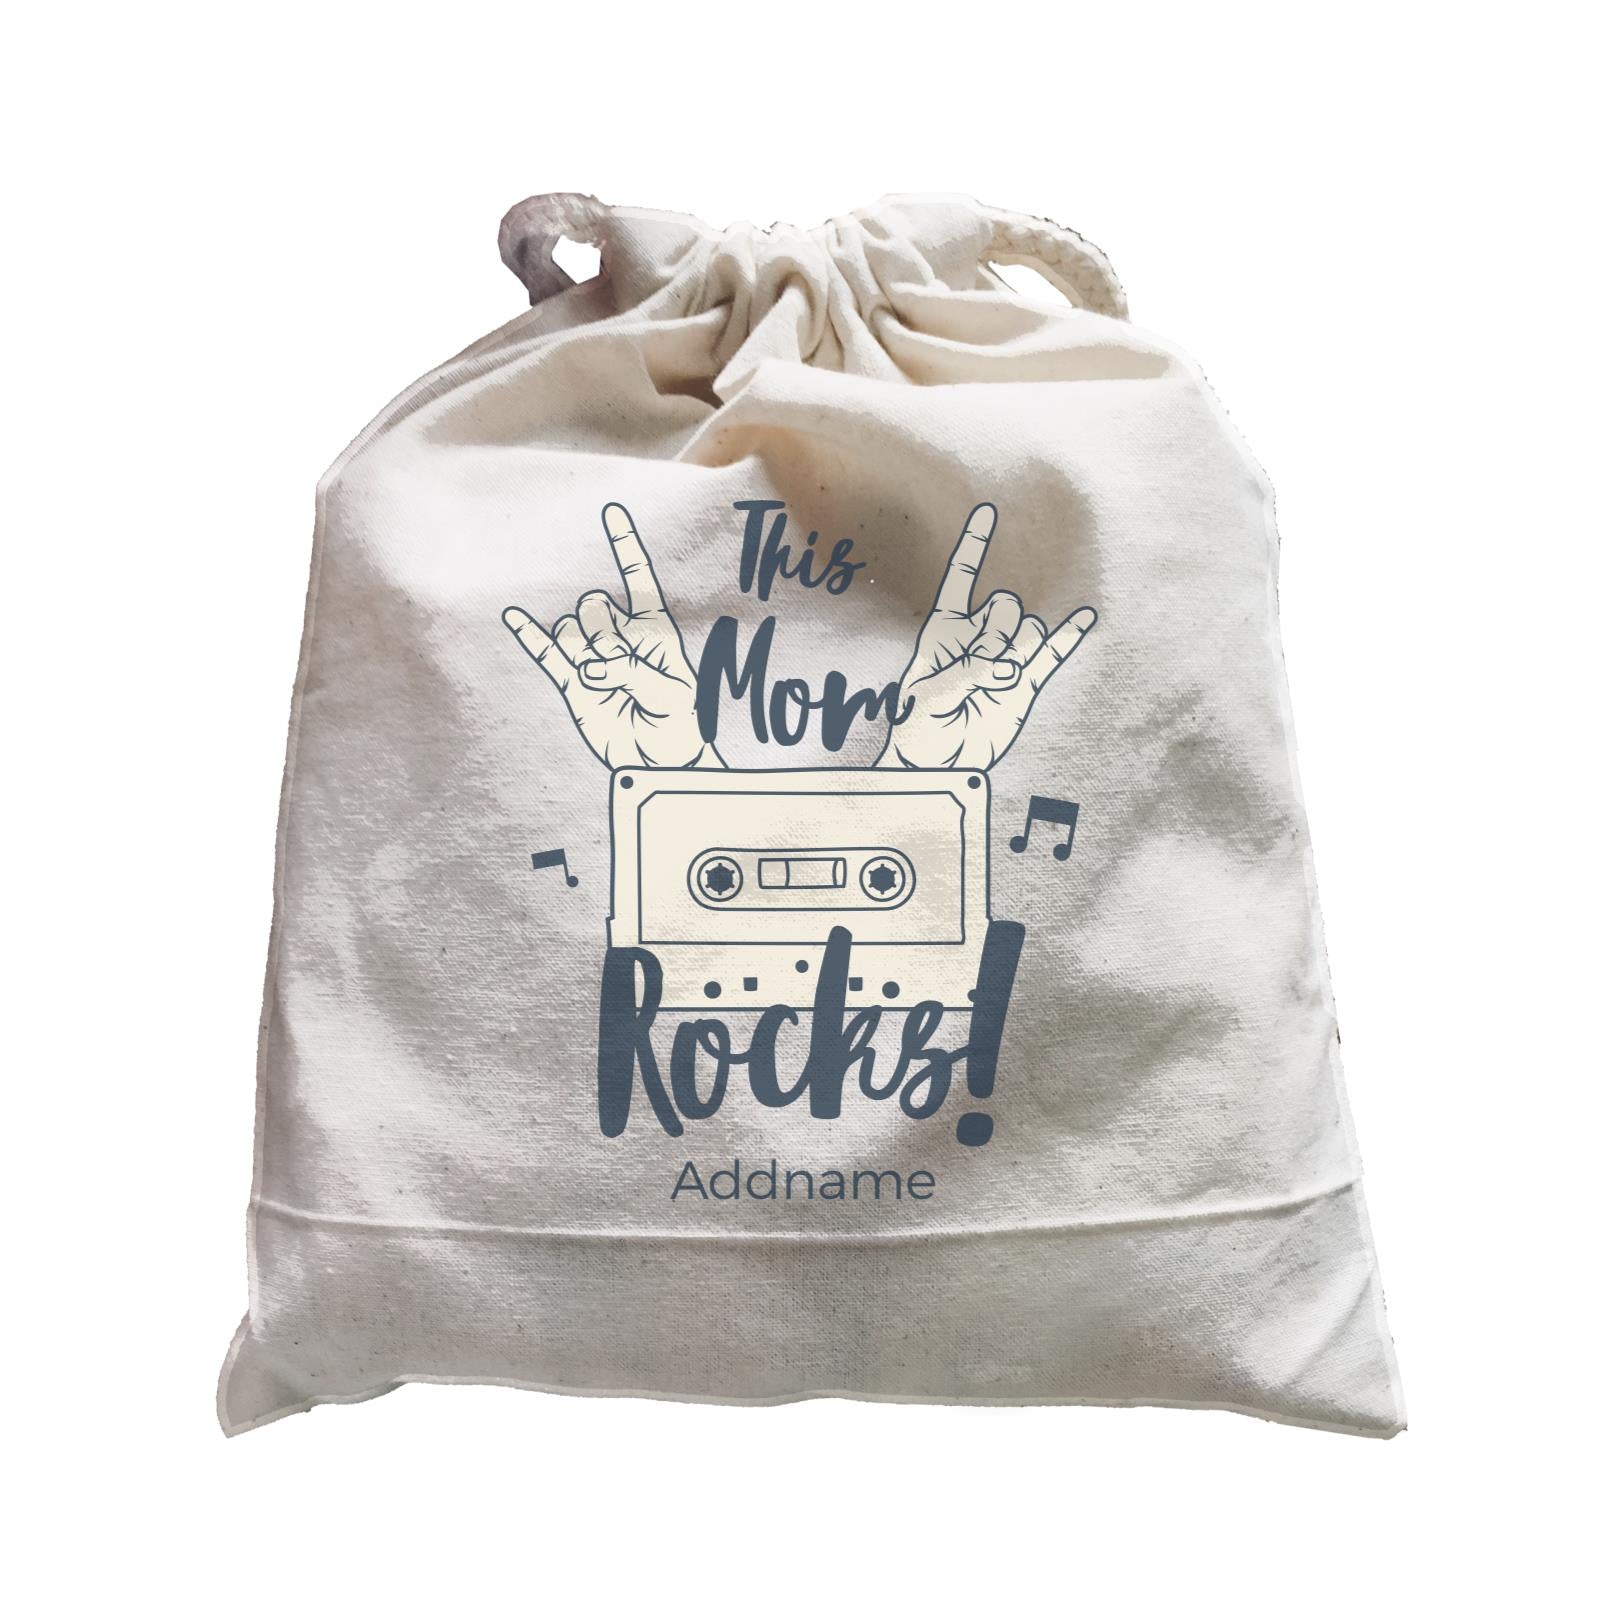 Awesome Mom 1 This Mom Rocks! Cassette Addname Satchel